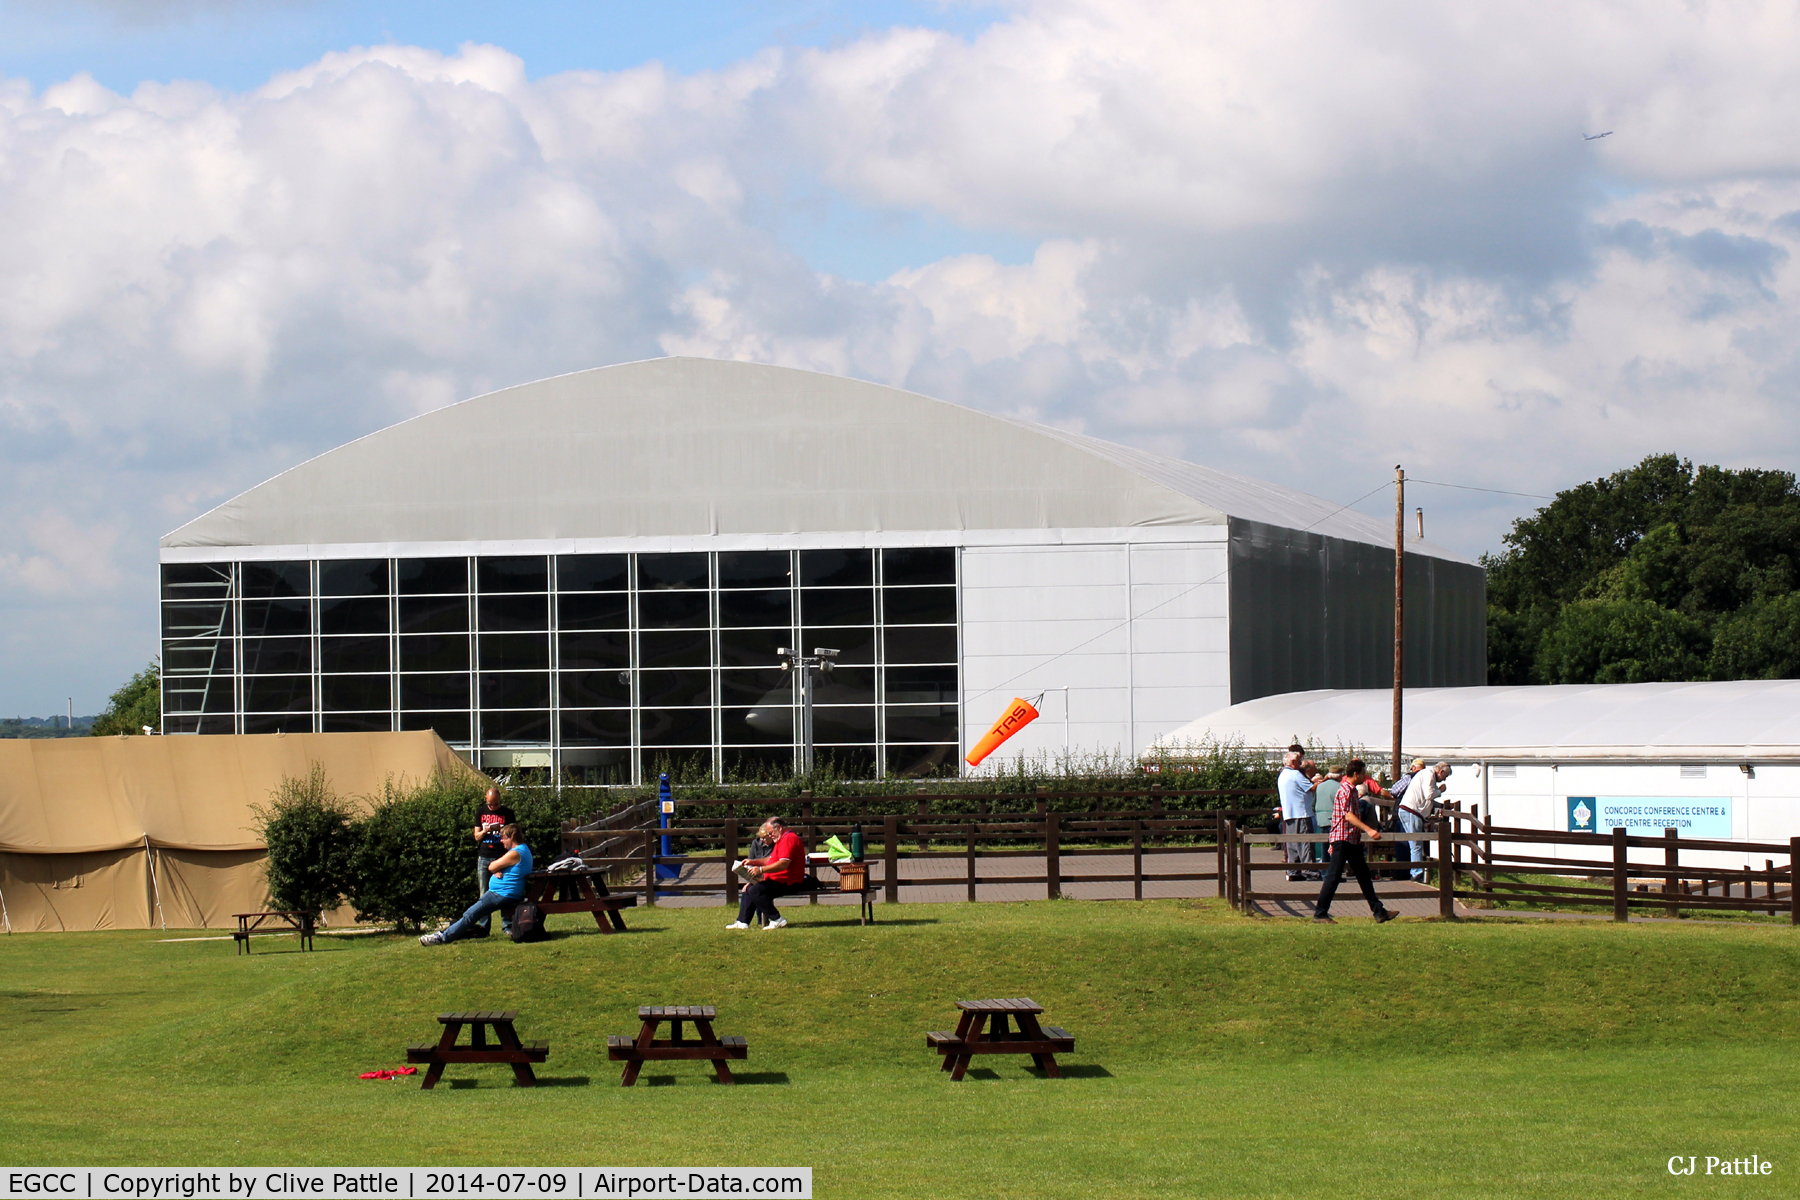 Manchester Airport, Manchester, England United Kingdom (EGCC) - View of excellent viewing enclosure with Concorde Hangar and Restaurant behind. - at Manchester EGCC